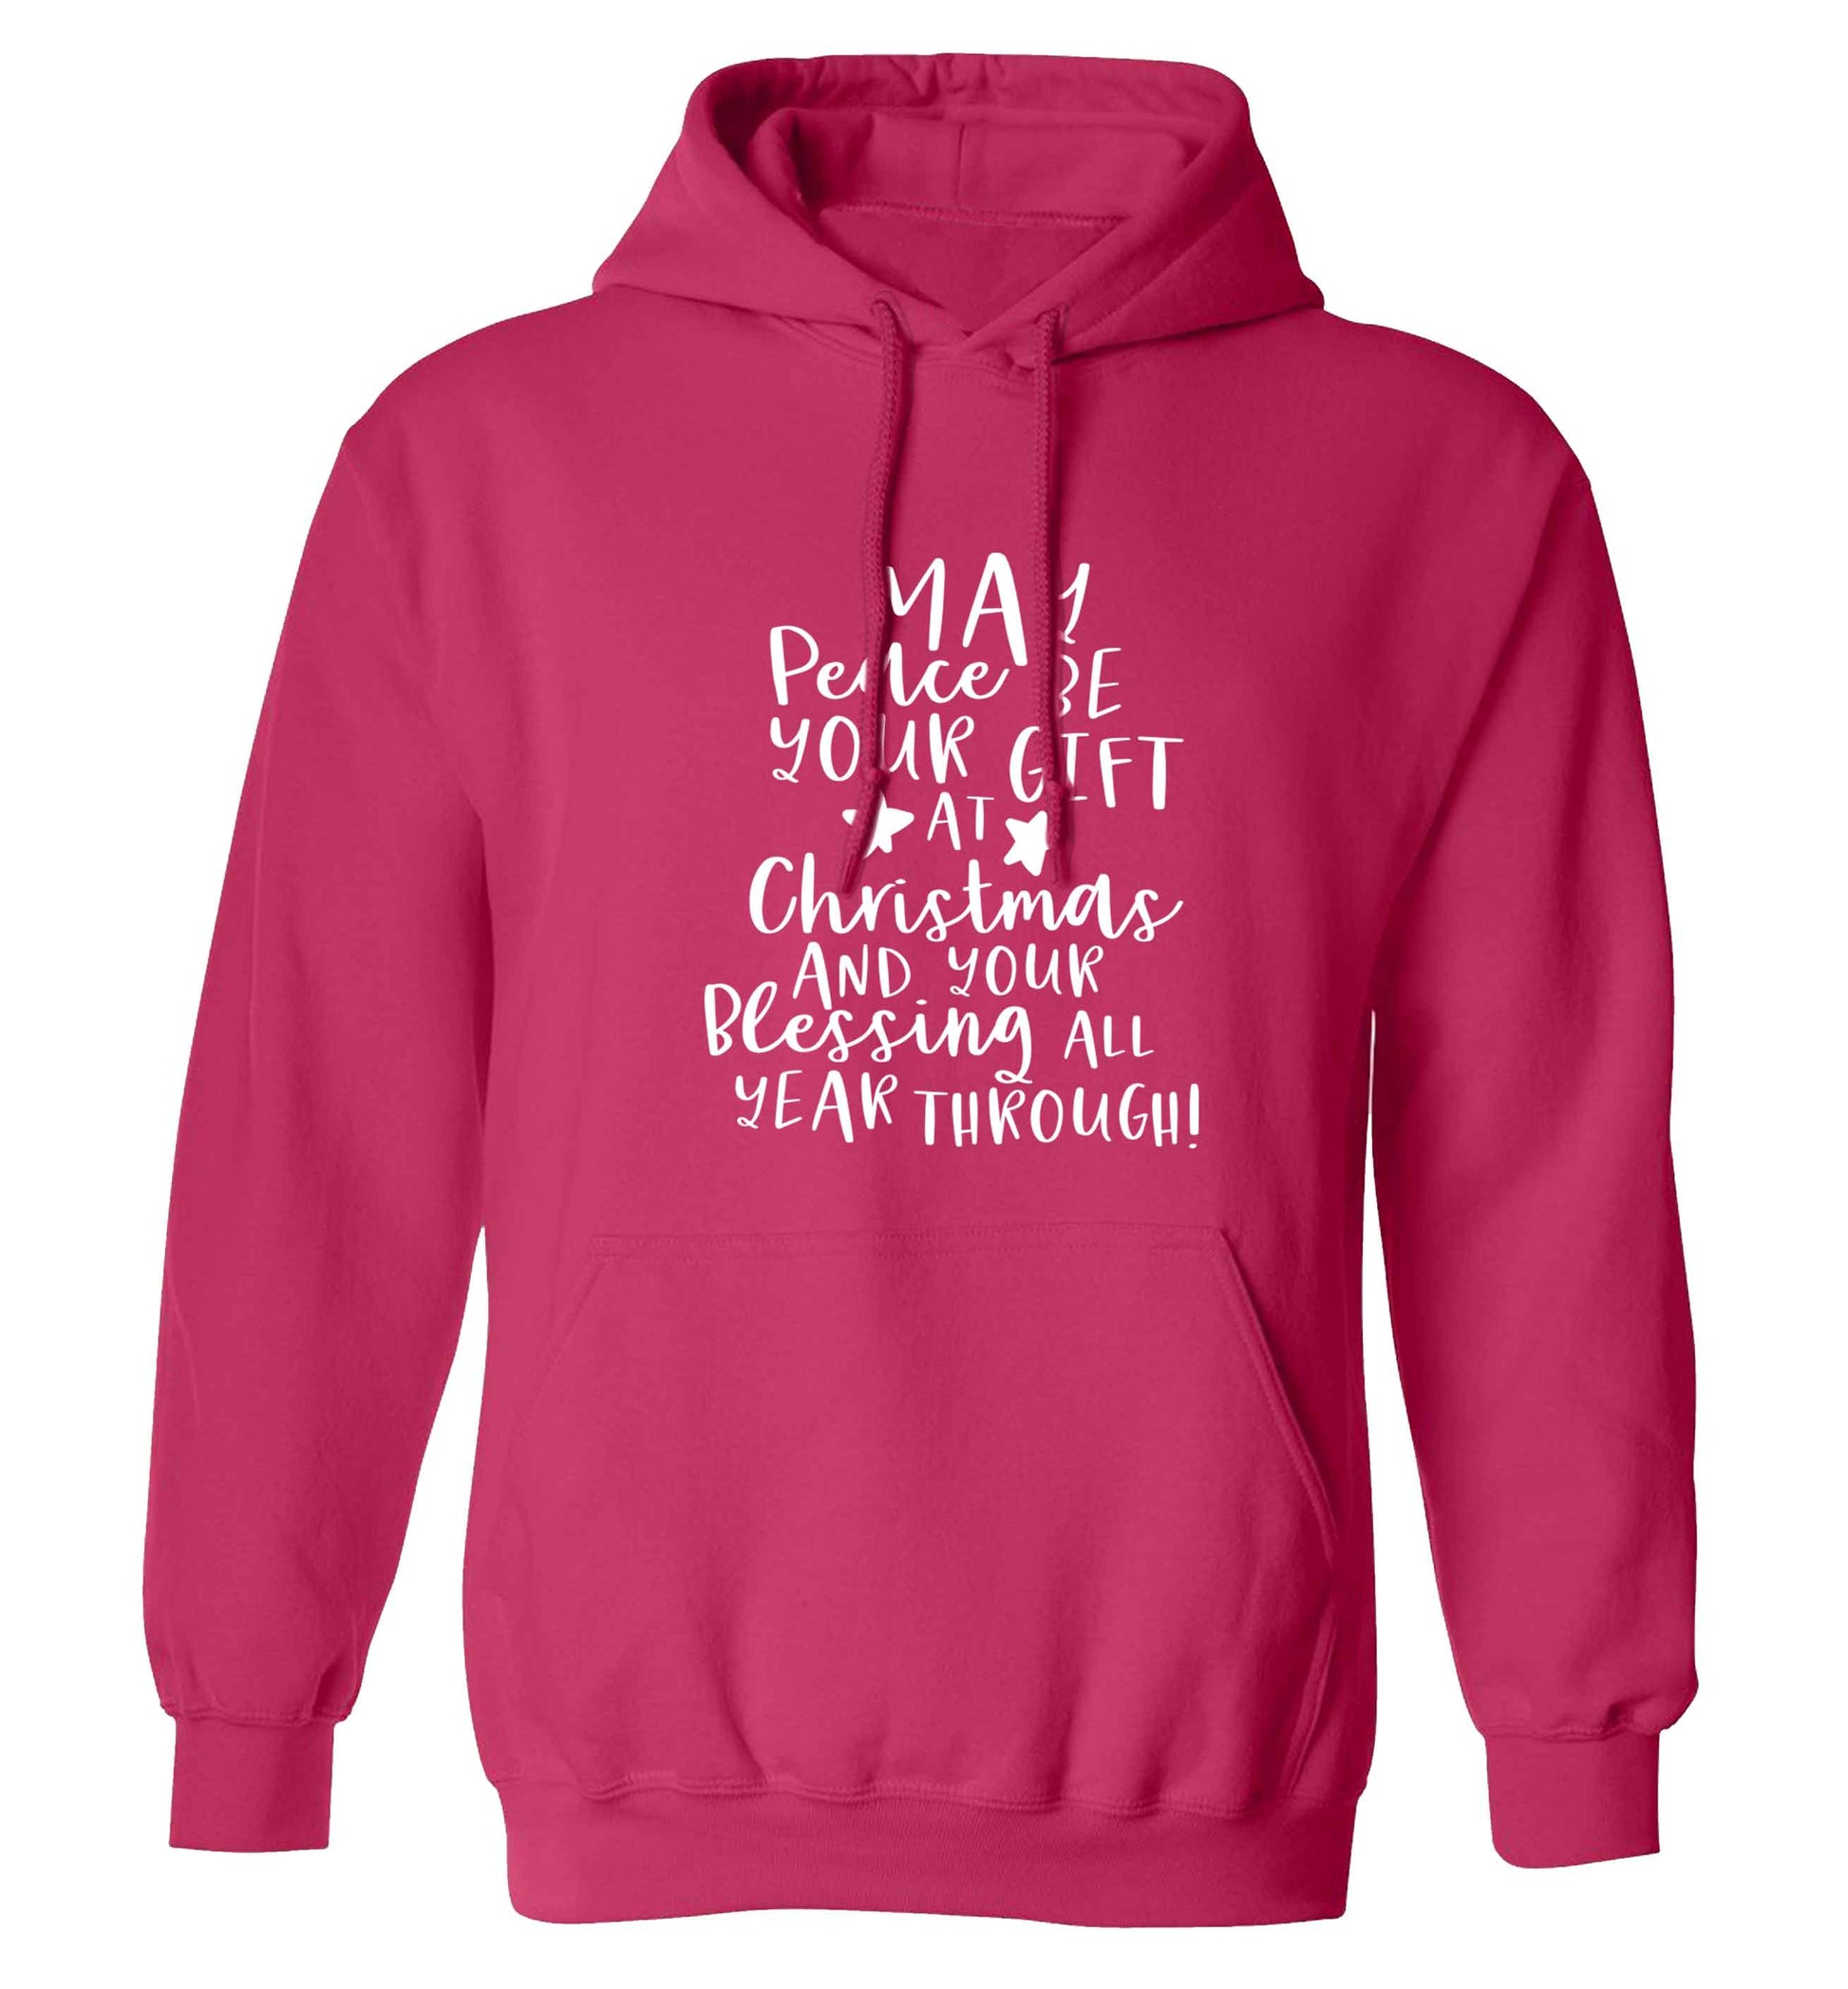 Peace be your Gift at Christmas Gift adults unisex pink hoodie 2XL